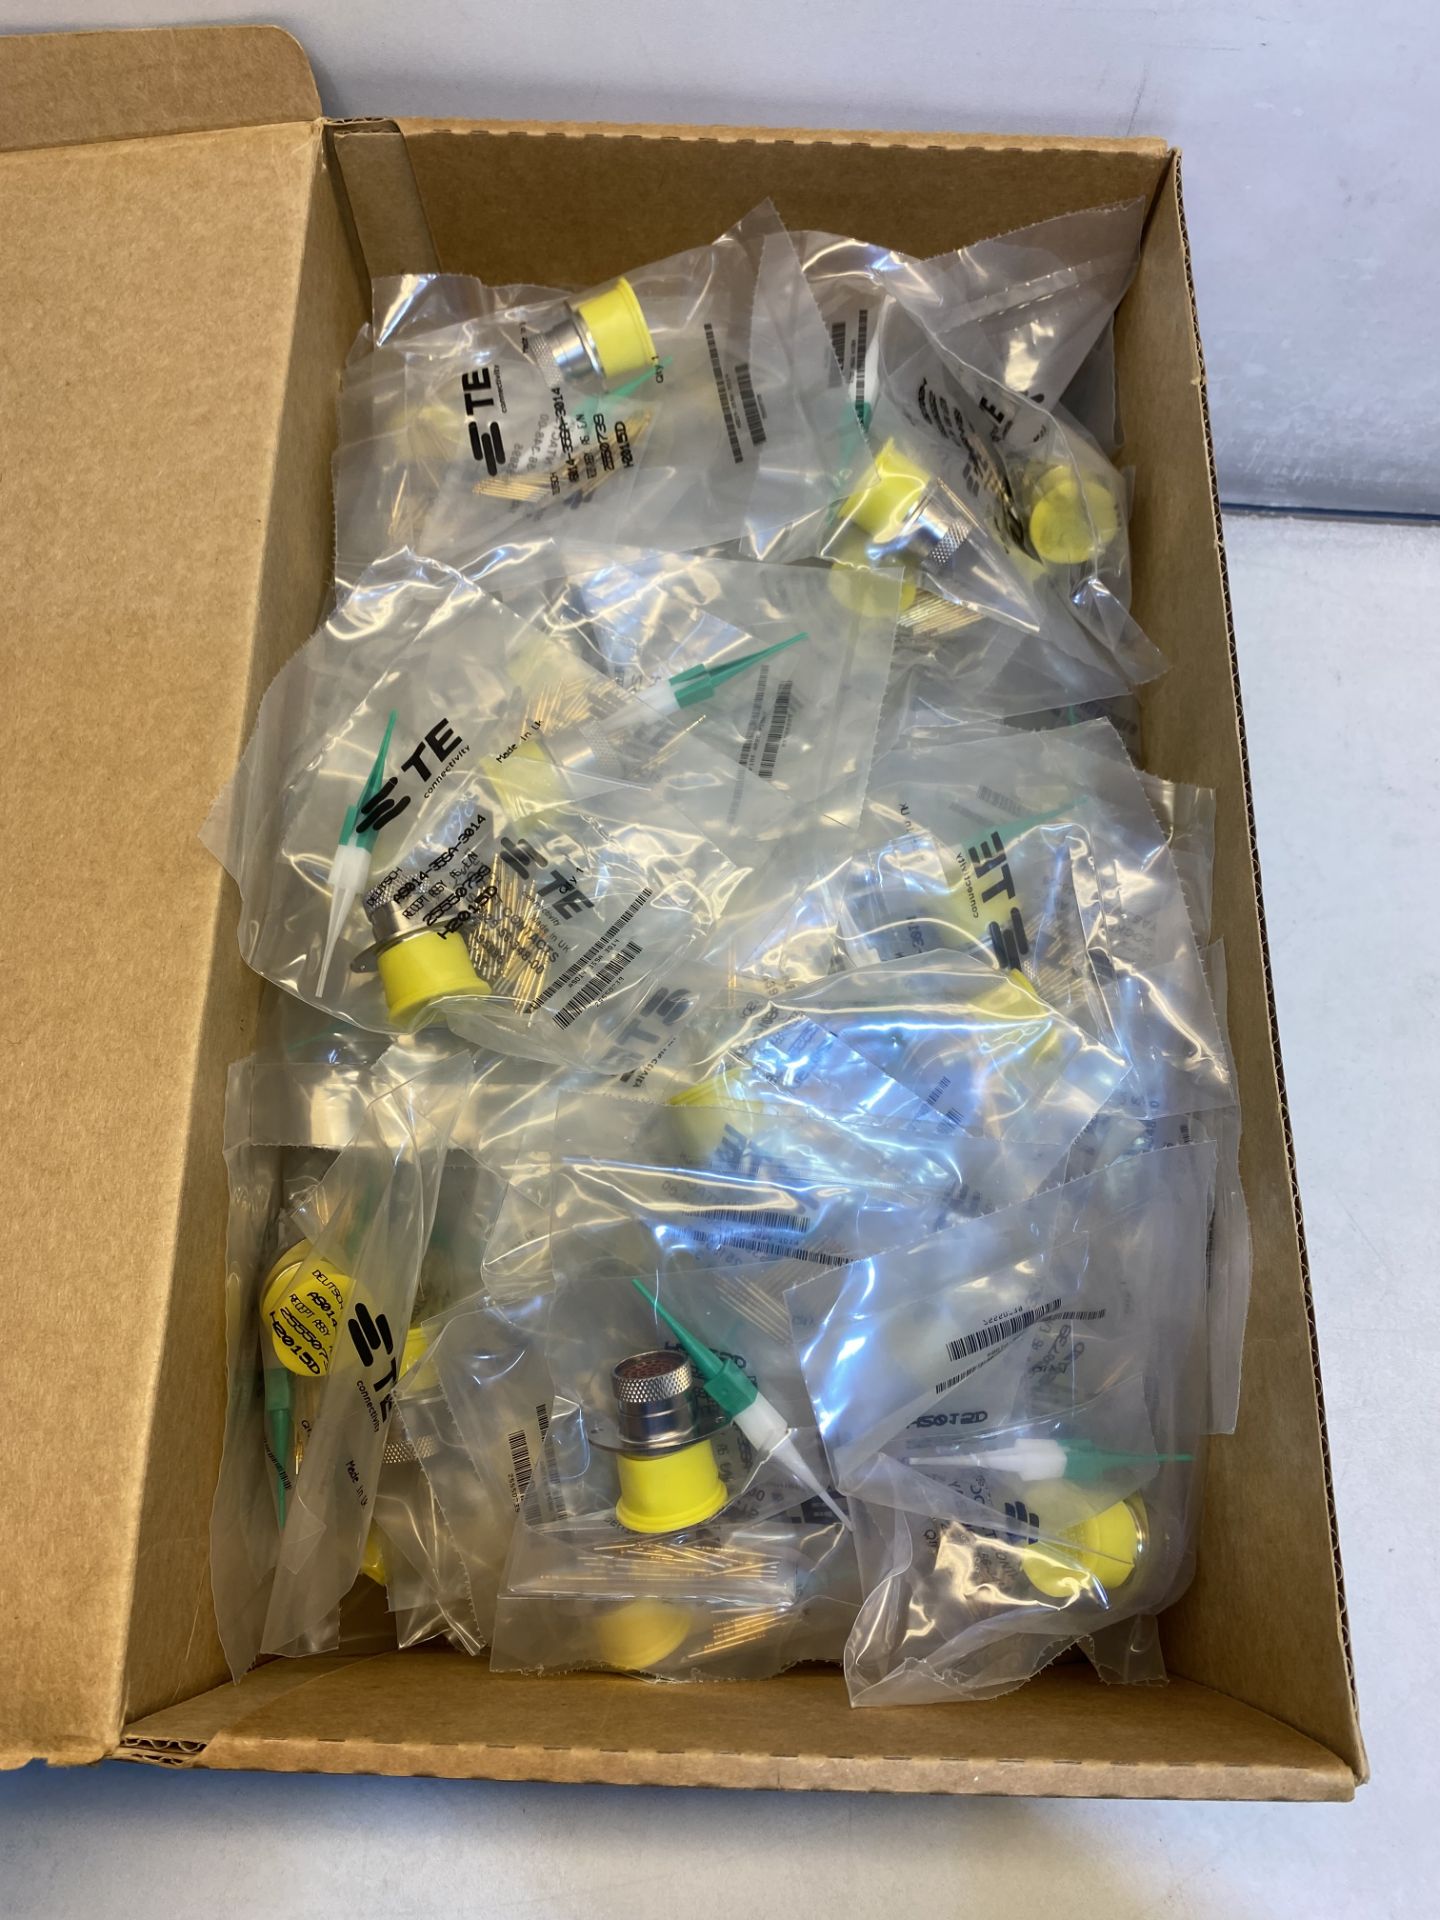 100 X Packs Of TE Connectivity AS014-35SA-3014 Standard Circular Connectors, Wire To Wire, 37 Positi - Image 3 of 3